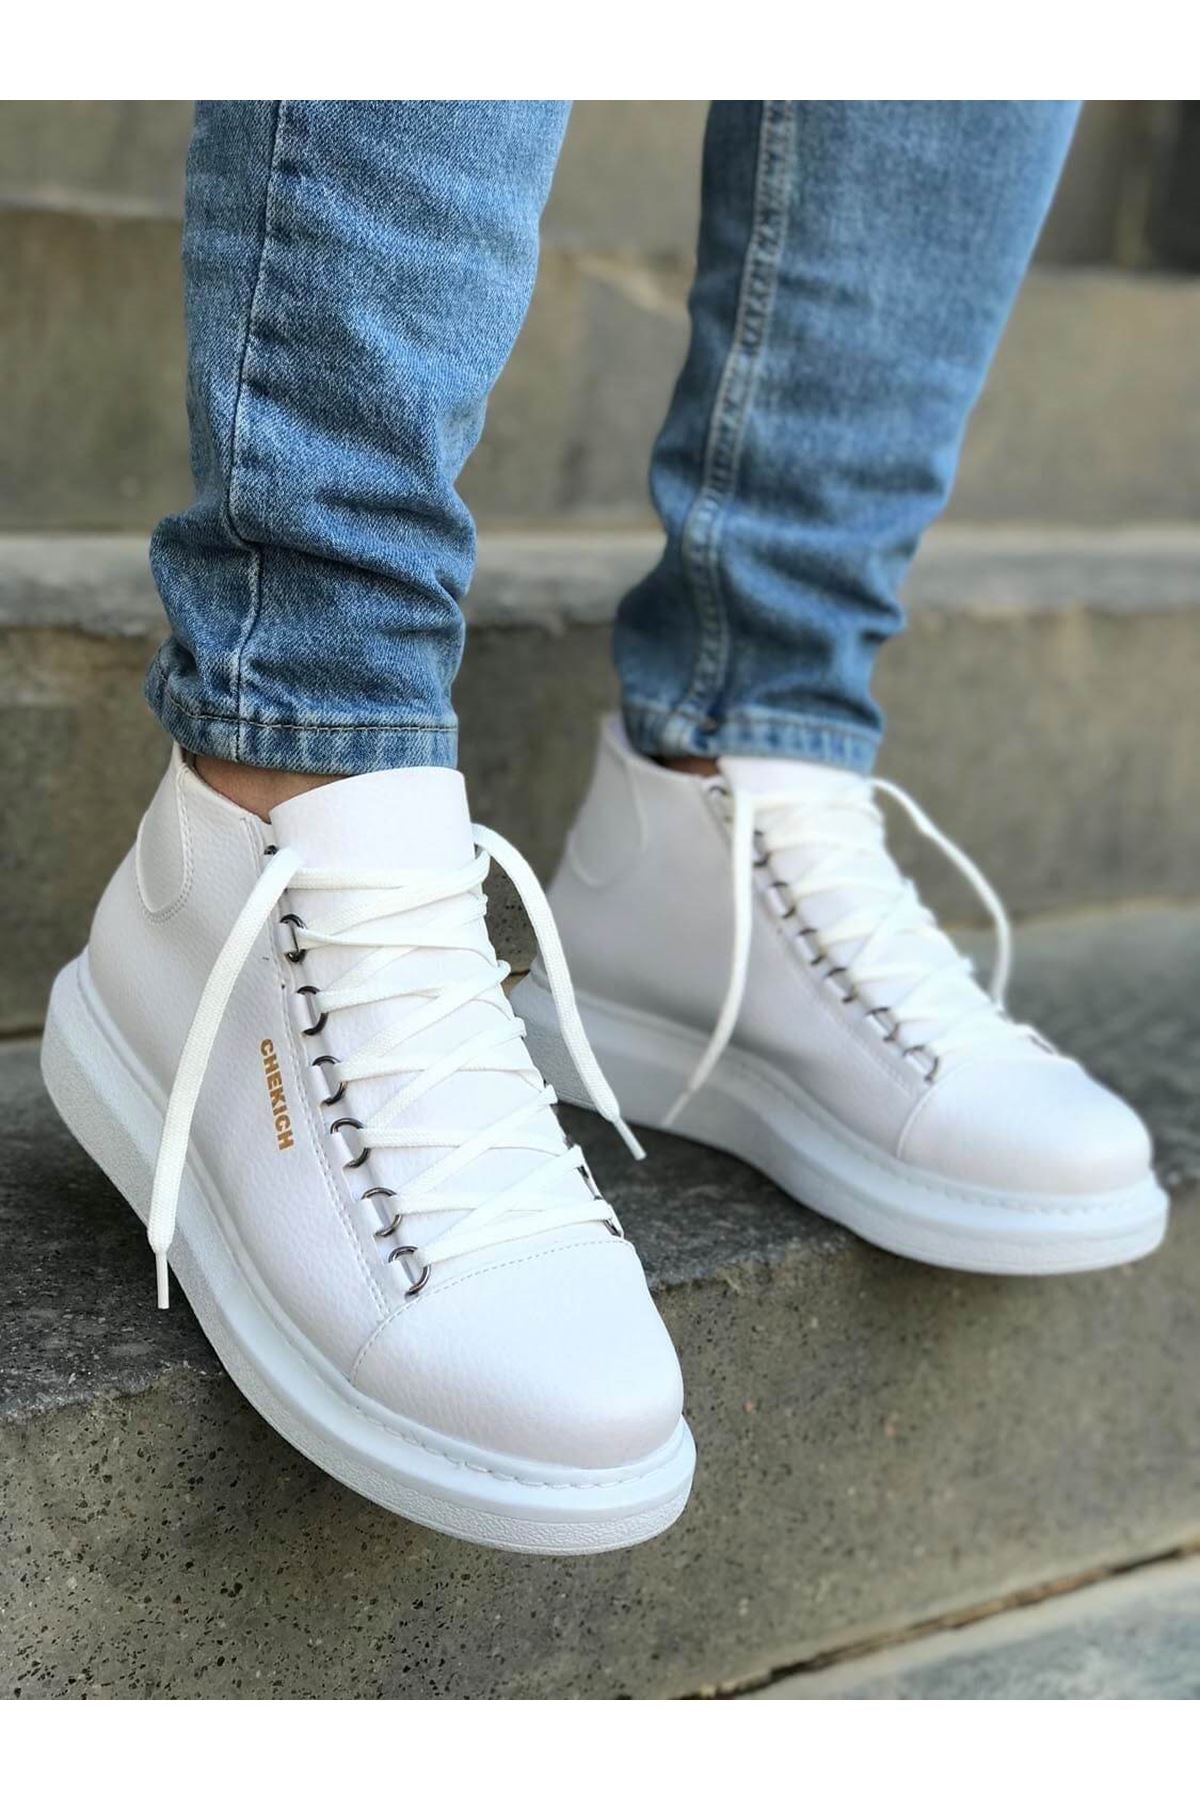 CH258 Men's White Metal Slug Lace-up High Sole Casual Sneaker Sports Boots - STREETMODE ™